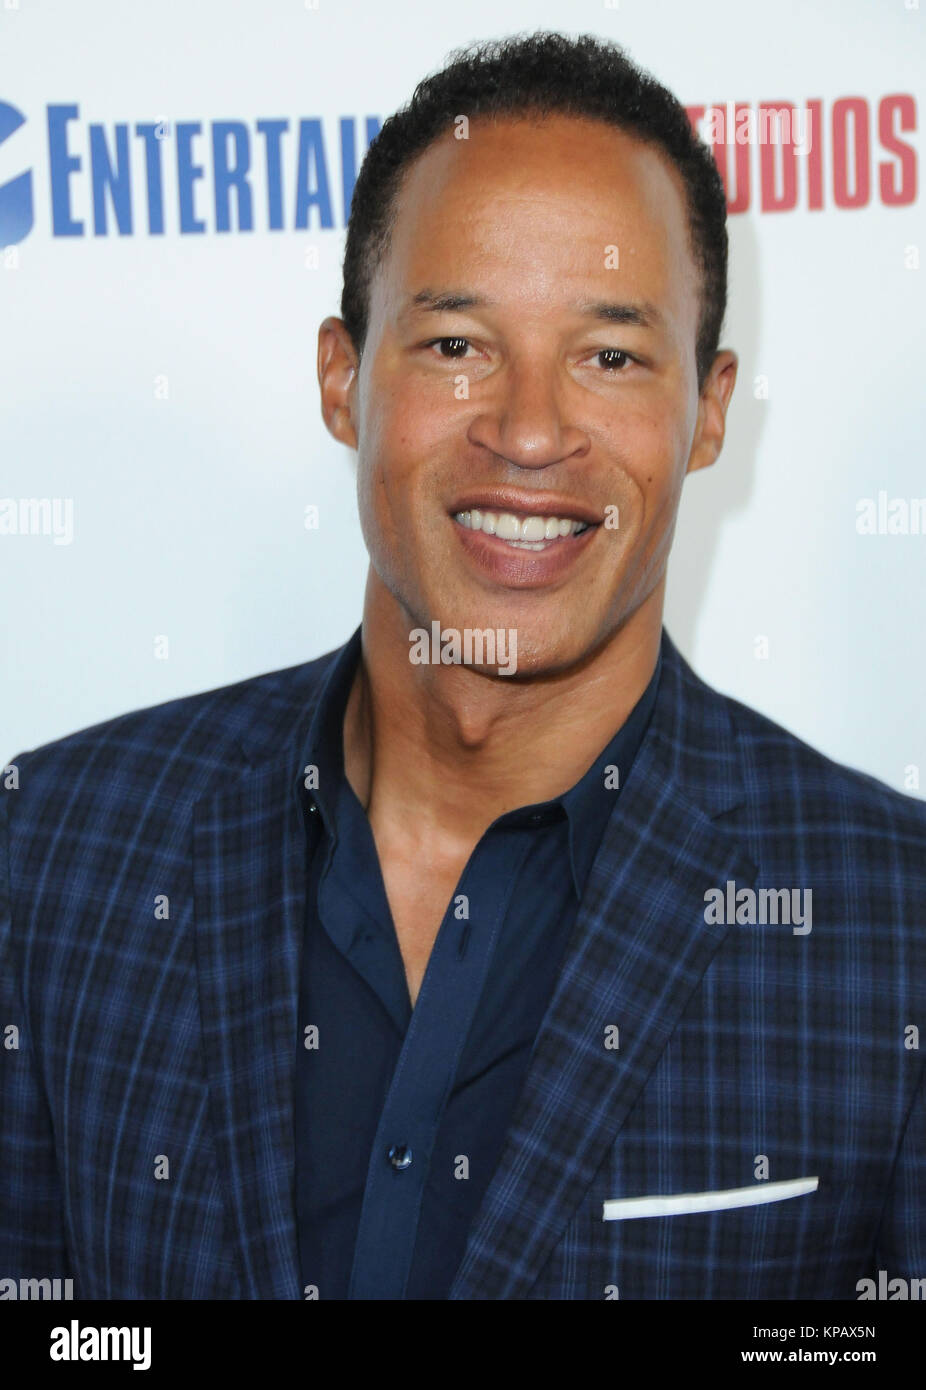 Beverly Hills, California, USA. 14th December, 2017. Producer Jon Kelley attends the Los Angeles premiere of Entertainment Studios Motion Pictures' 'Hostiles' at Samuel Goldwyn Theater on December 14, 2017 in Beverly Hills, California. Photo by Barry King/Alamy Live News Stock Photo